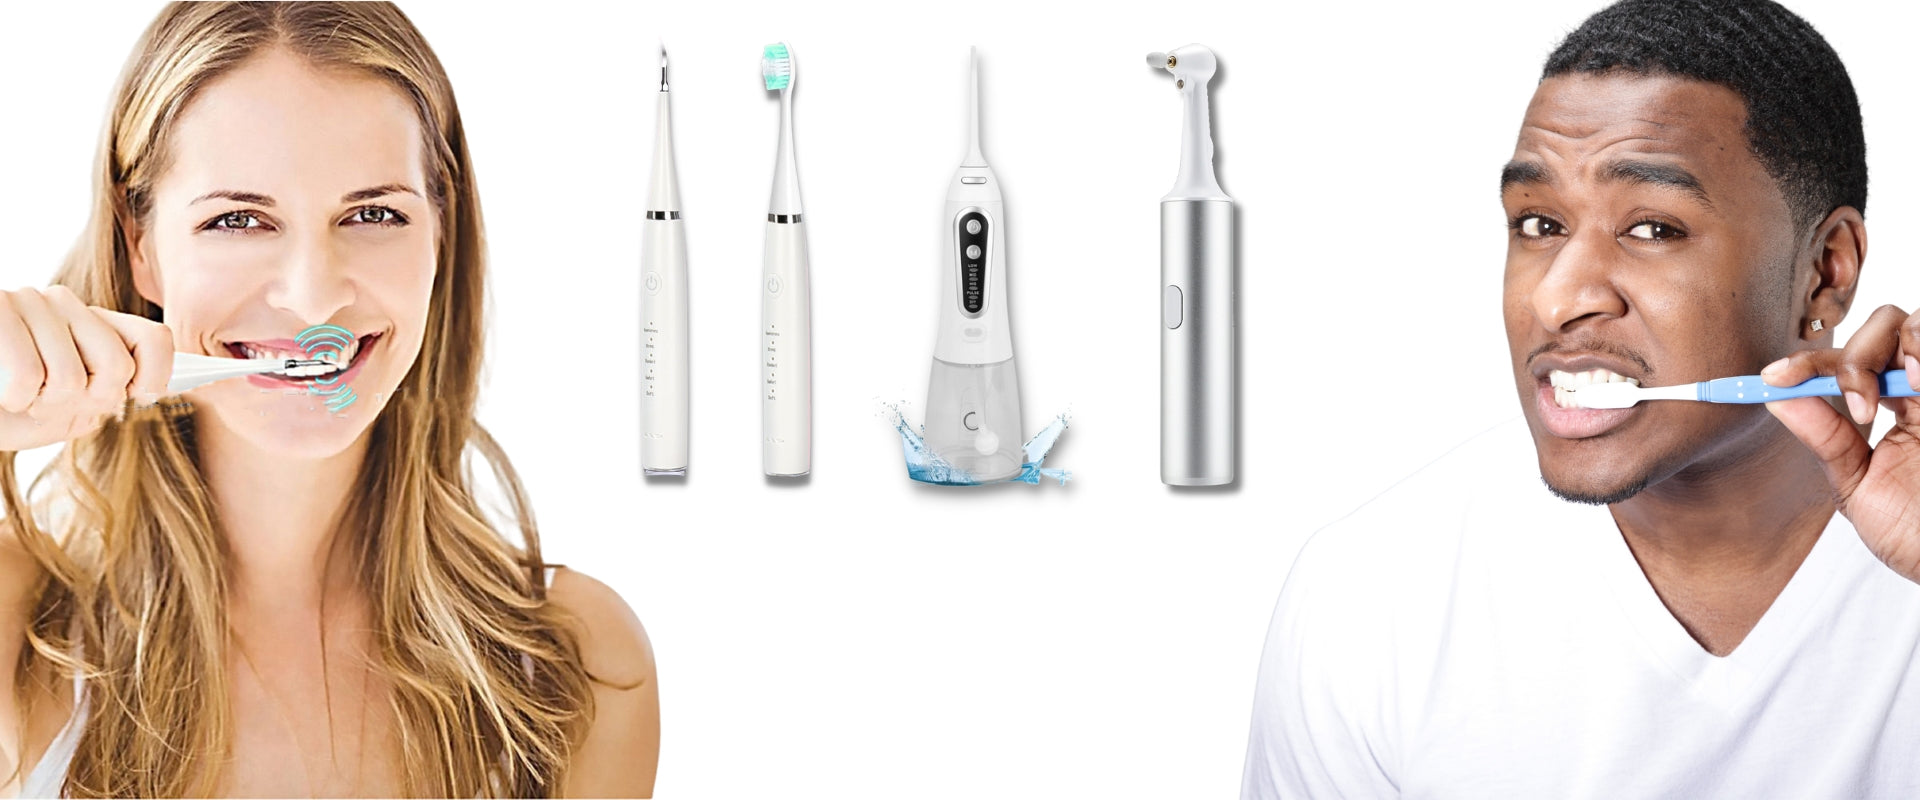  Home page banner for world's best home dental products from WhiteWaveSmile